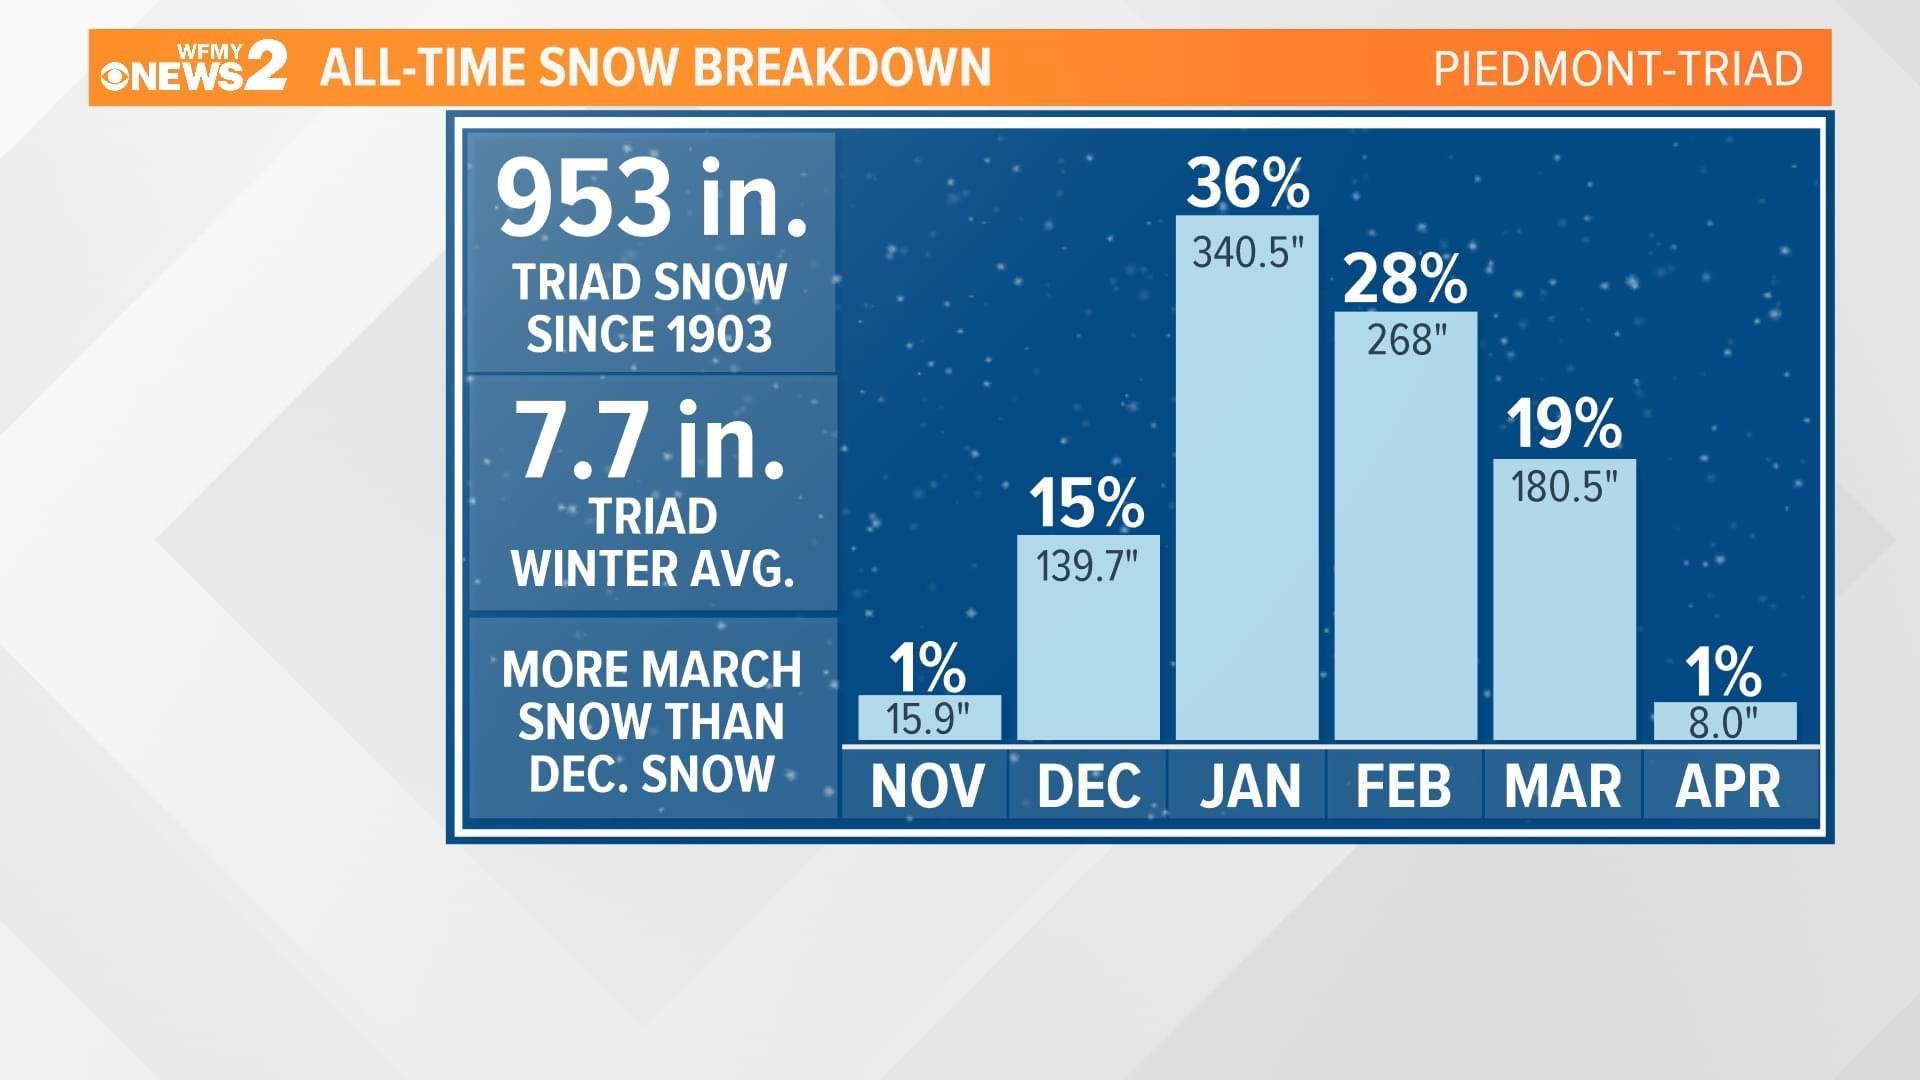 January takes the cake for the Triad’s snowiest month, followed by February, March and then December.